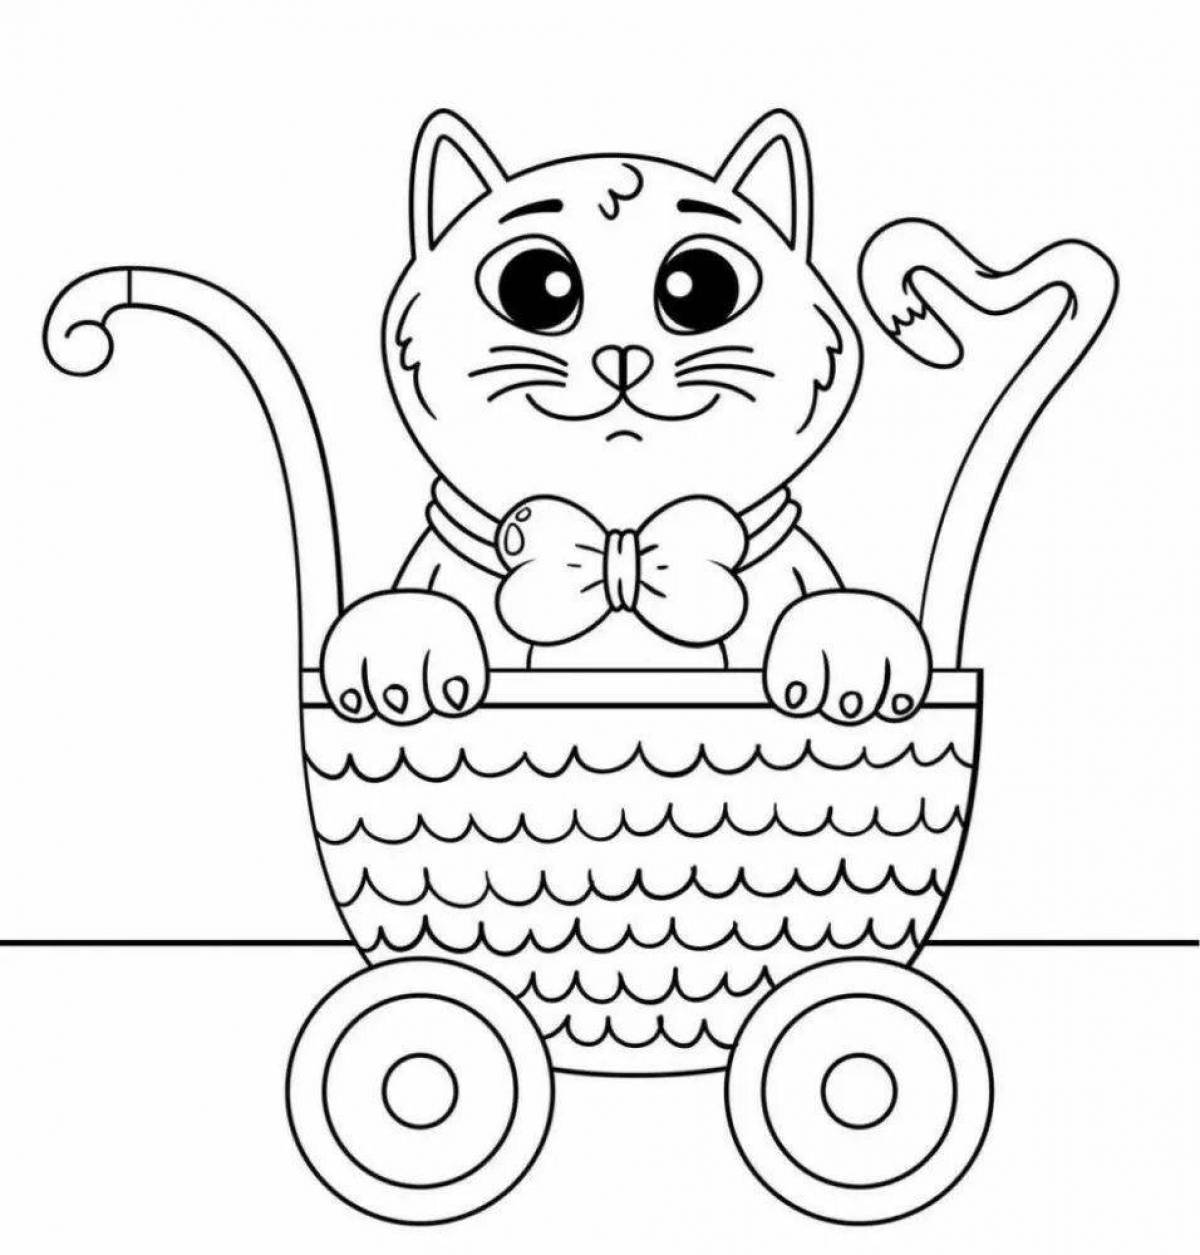 Colorful kitten in a cup coloring book